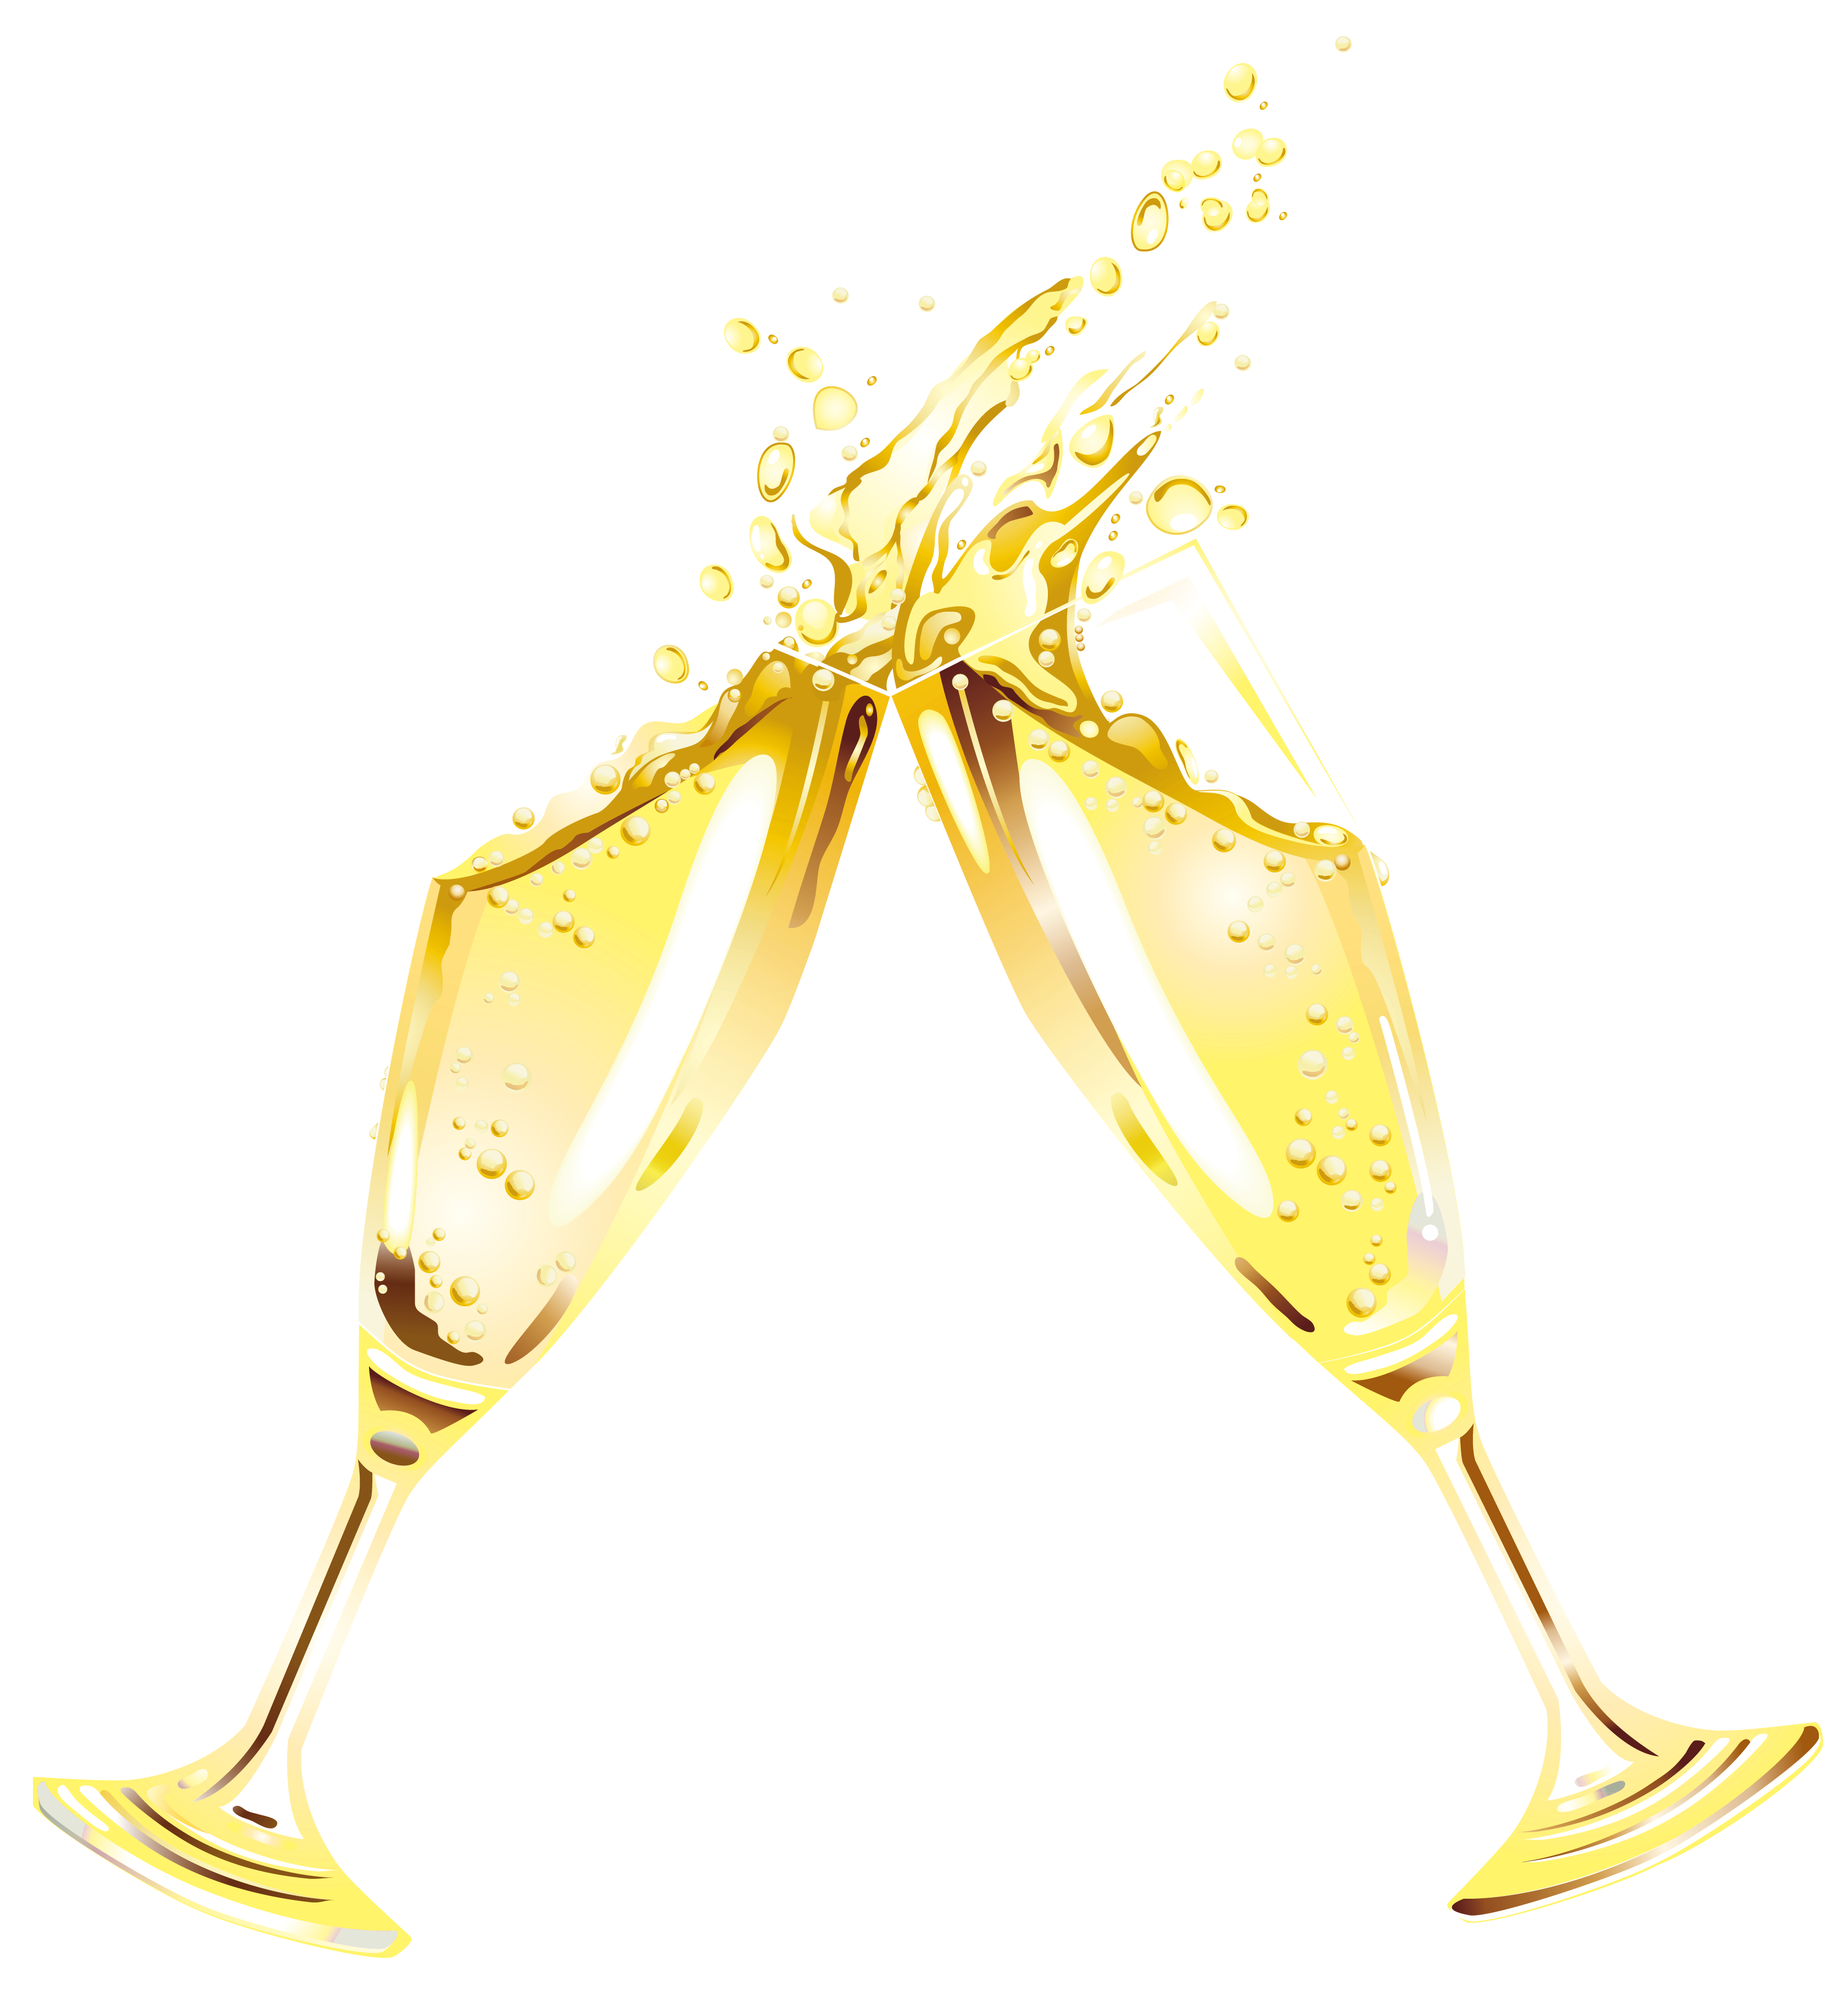 Champagne flutes gallery yopriceville. Glasses clipart new year